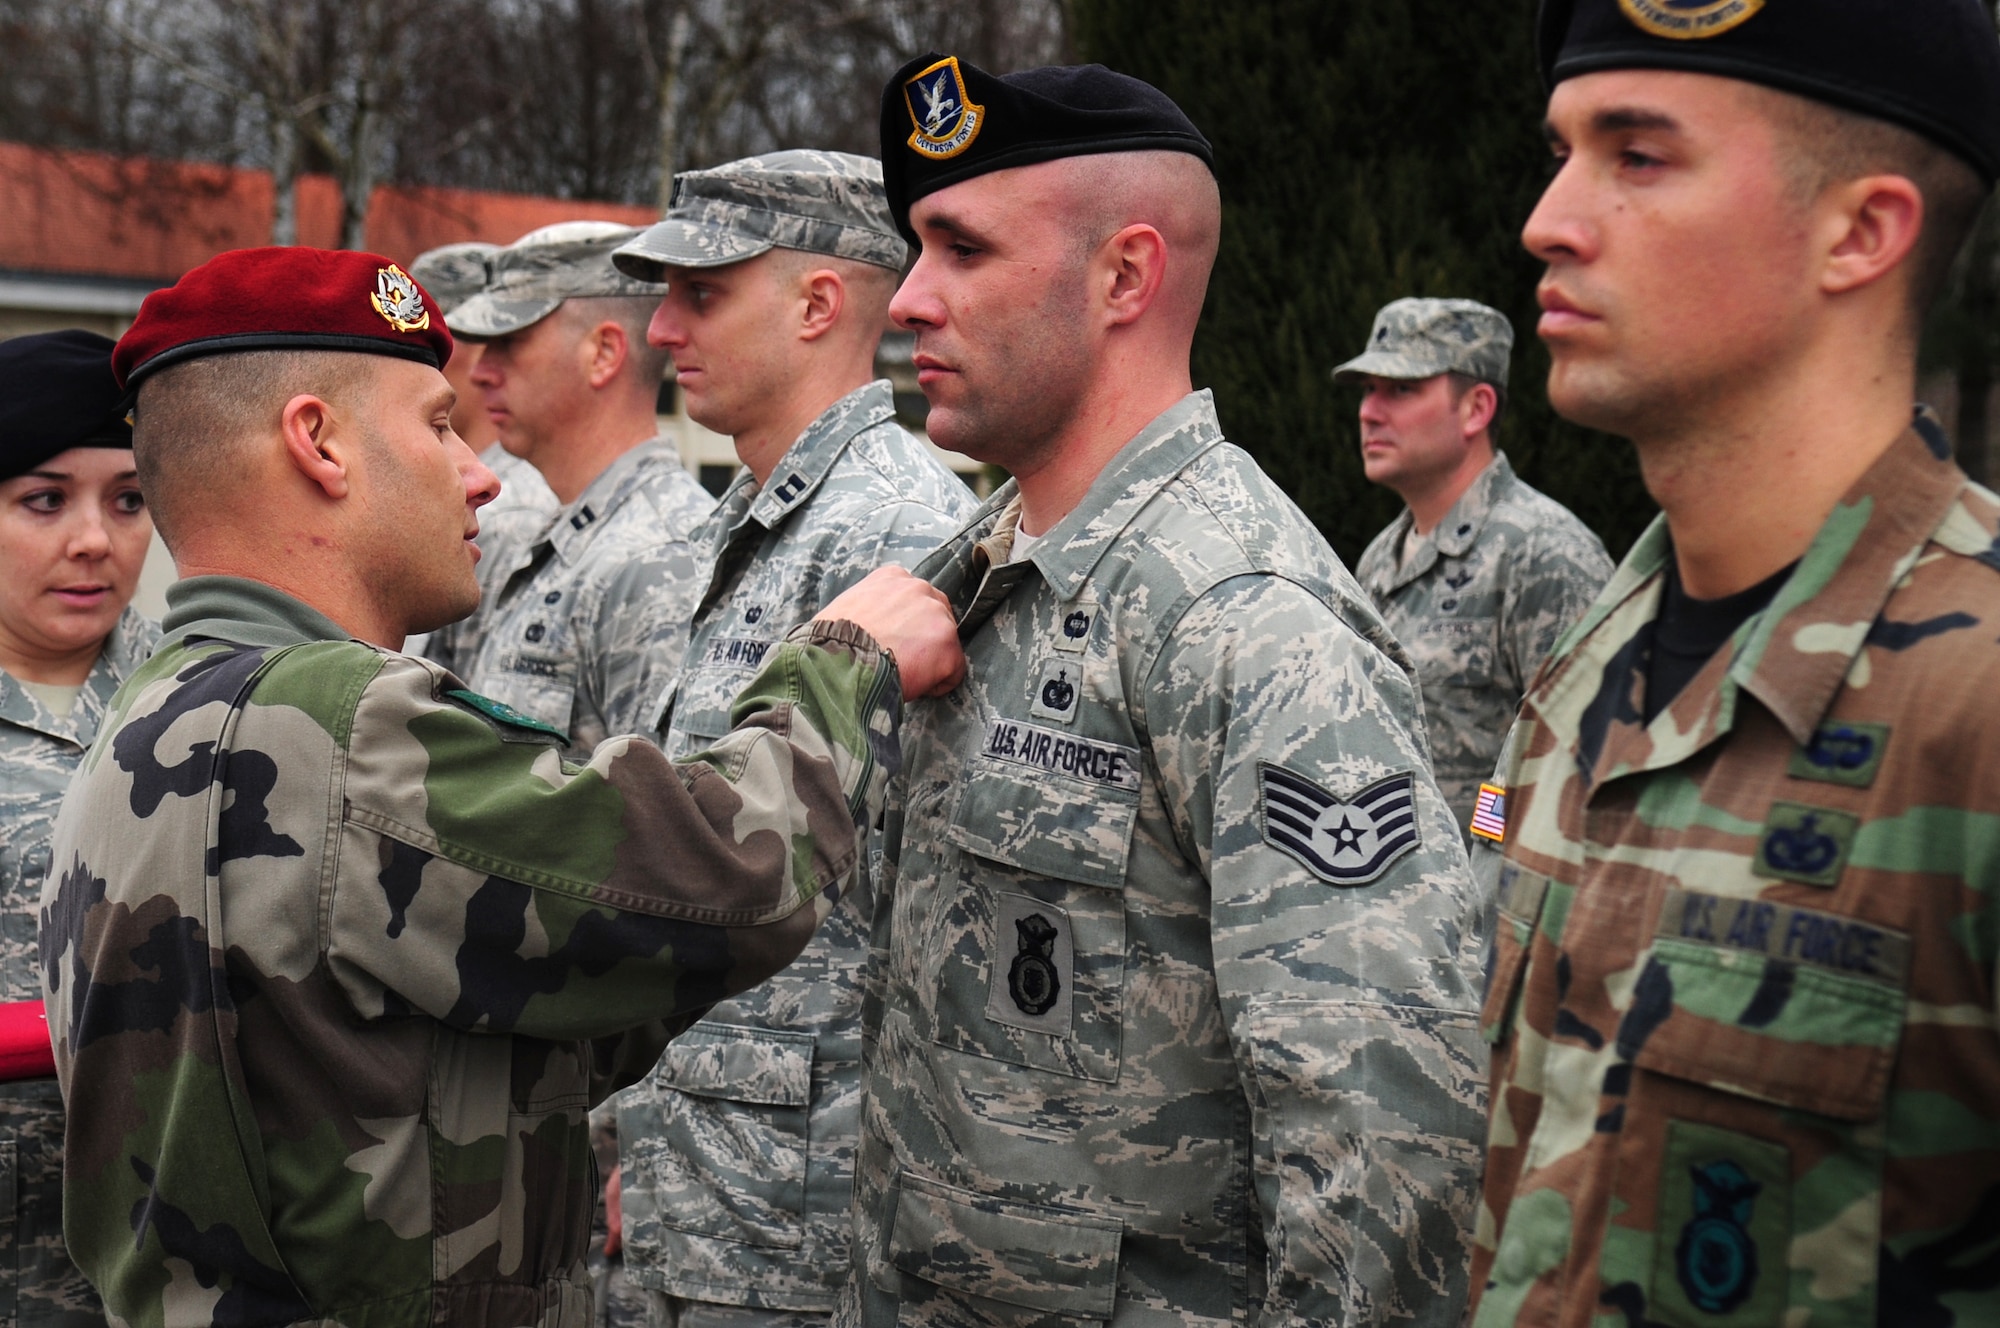 After a week of training and jumping together, Academy instructor Master Sgt. Stephane Paternotte presents U.S. military members with French jump wings during a formal ceremony concluding the week, March 4, 2010.  Members of the 435th Contingency Response Group and the 5th Quartermaster Company joined with their French military counterparts for a week of training at the École des troupes aéroportées (ETAP), or School of Airborne Troops, a military school dedicated to training the military paratroopers   of the French army, located in the town of Pau, in the département  of Pyrénées-Atlantiques , France.  The ETAP is responsible for training paratroopers, and for international cooperation and promotion of paratroop culture. (U.S. Air Force Photo by Staff Sgt. Jocelyn Rich)